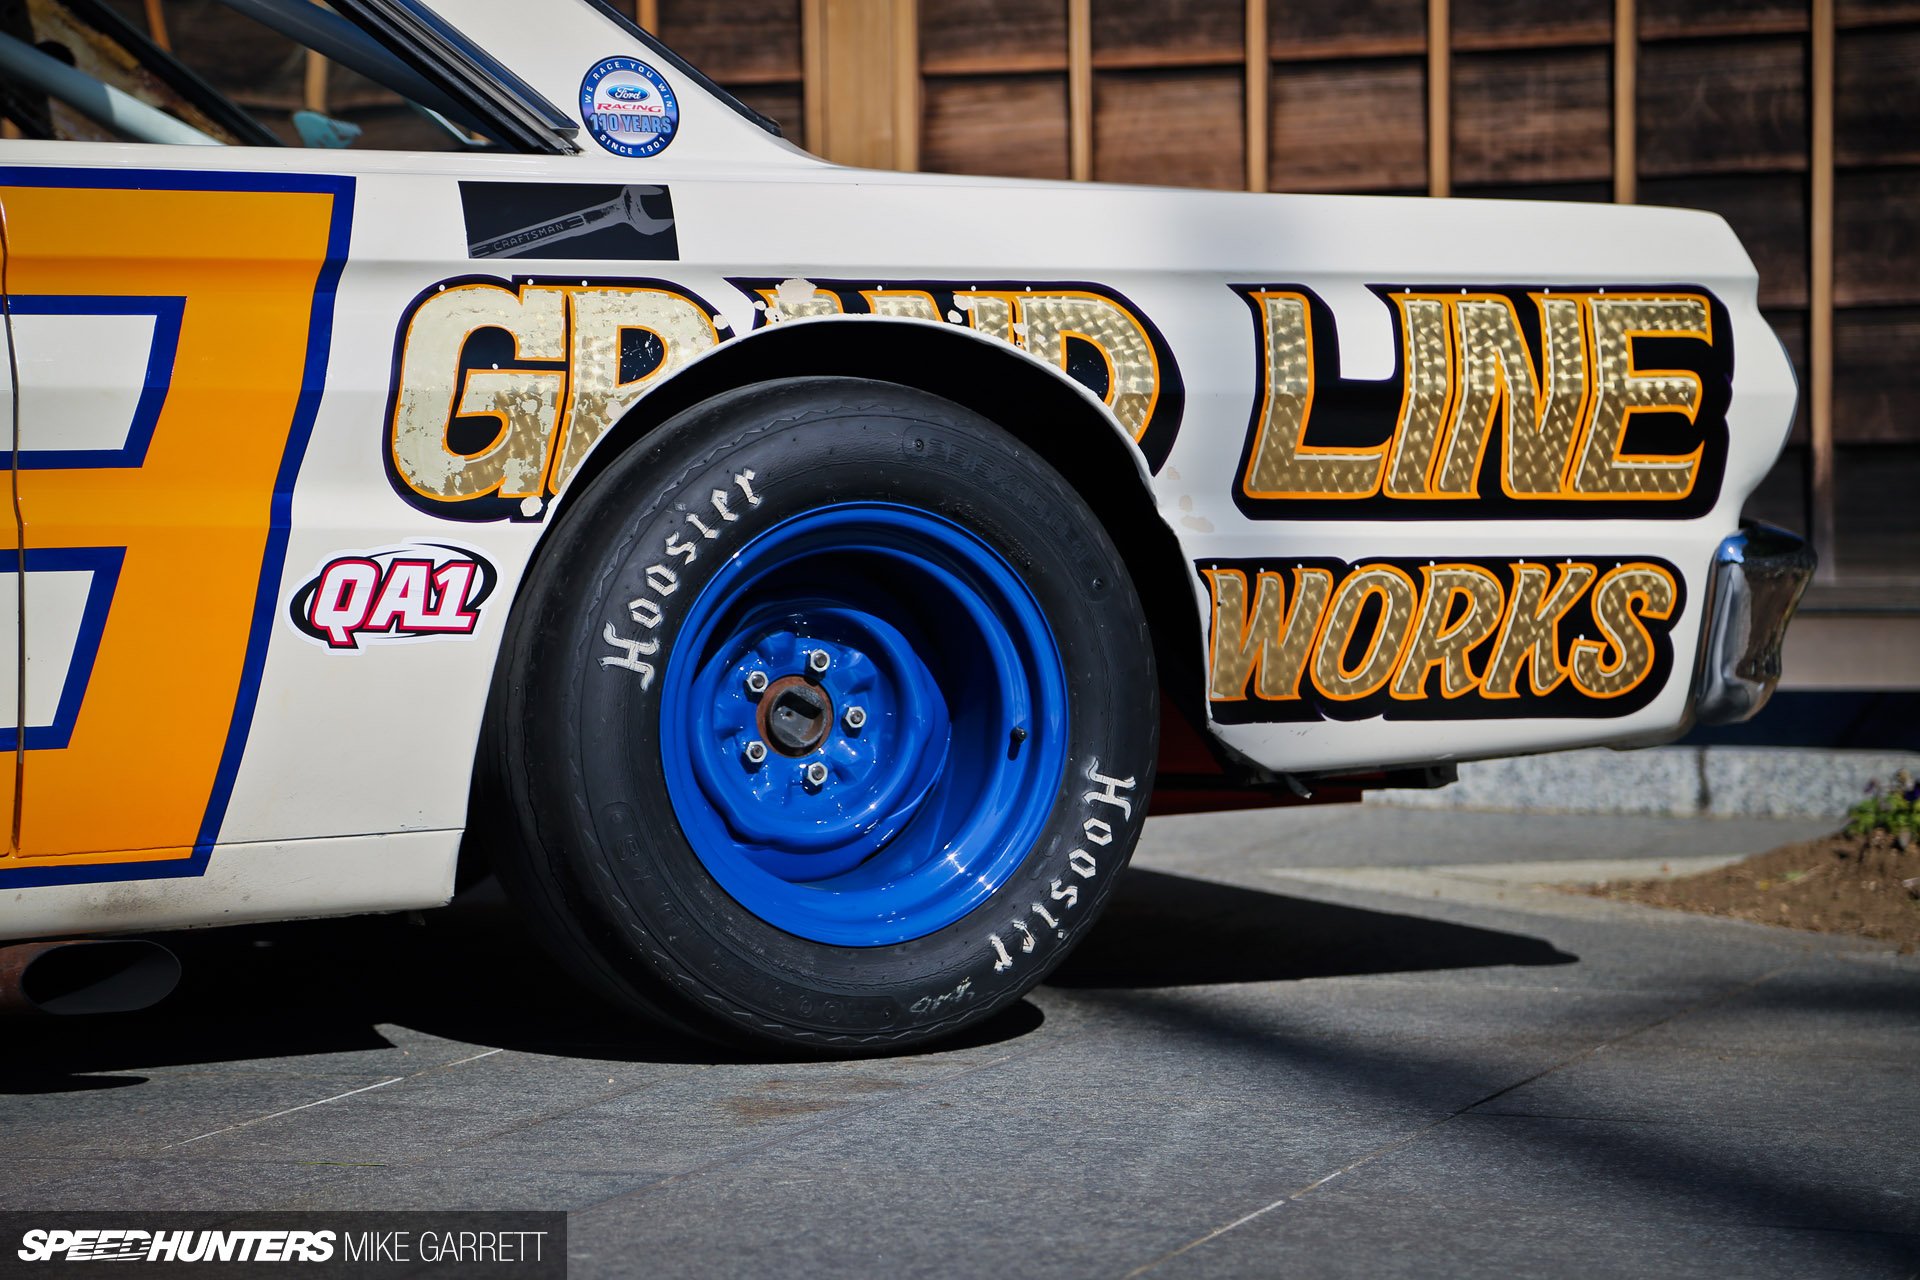 falcon, Ford, Nascar, Retro, Shelby, Race, Racing, Classic, Muscle, Wheel Wallpaper